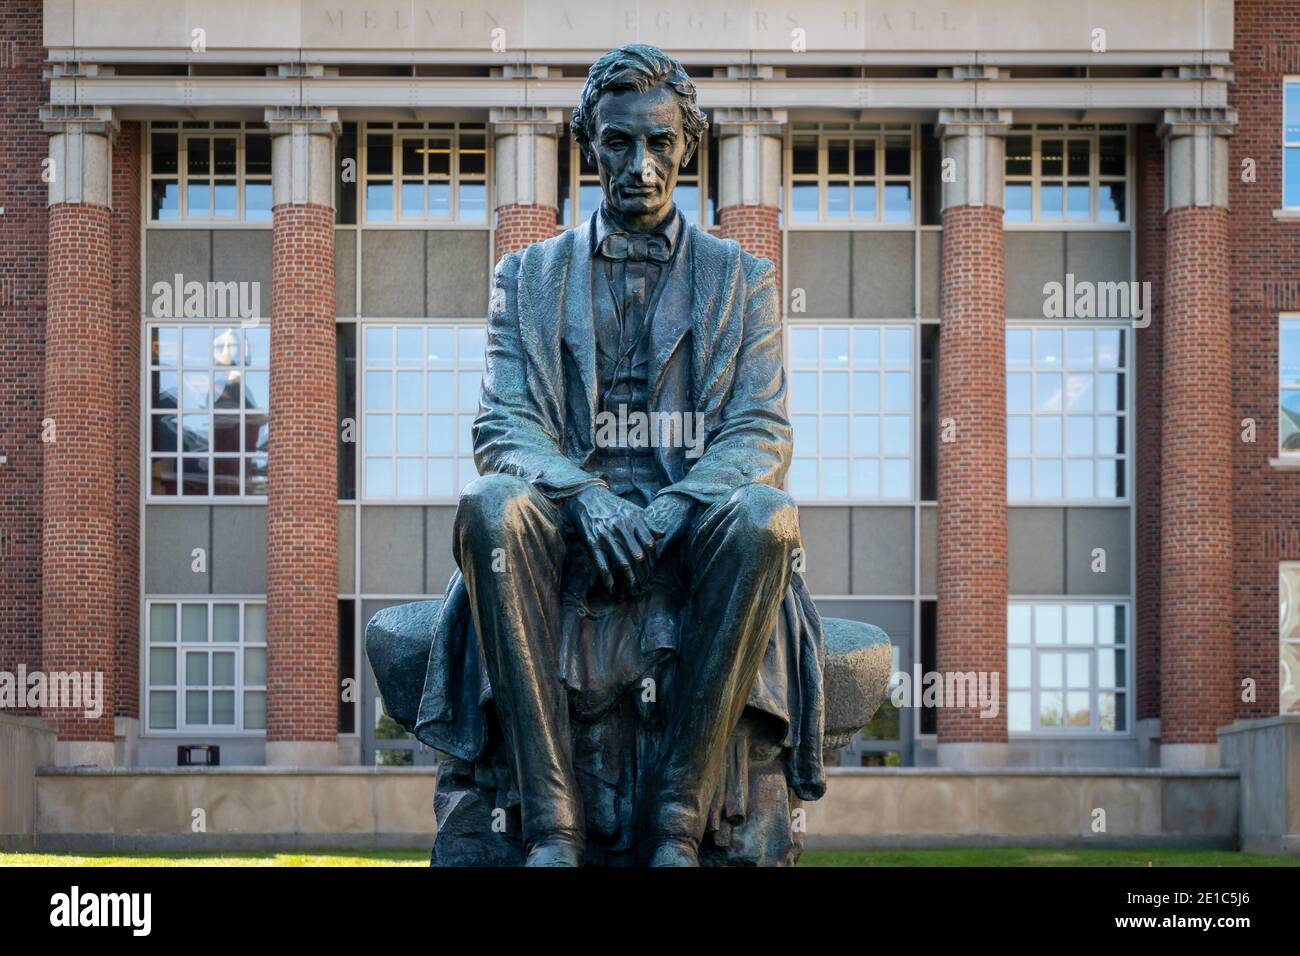 A statue of a young Abraham Lincoln sits in a courtyard on the campus of Syracuse University in Syracuse, New York. Stock Photo